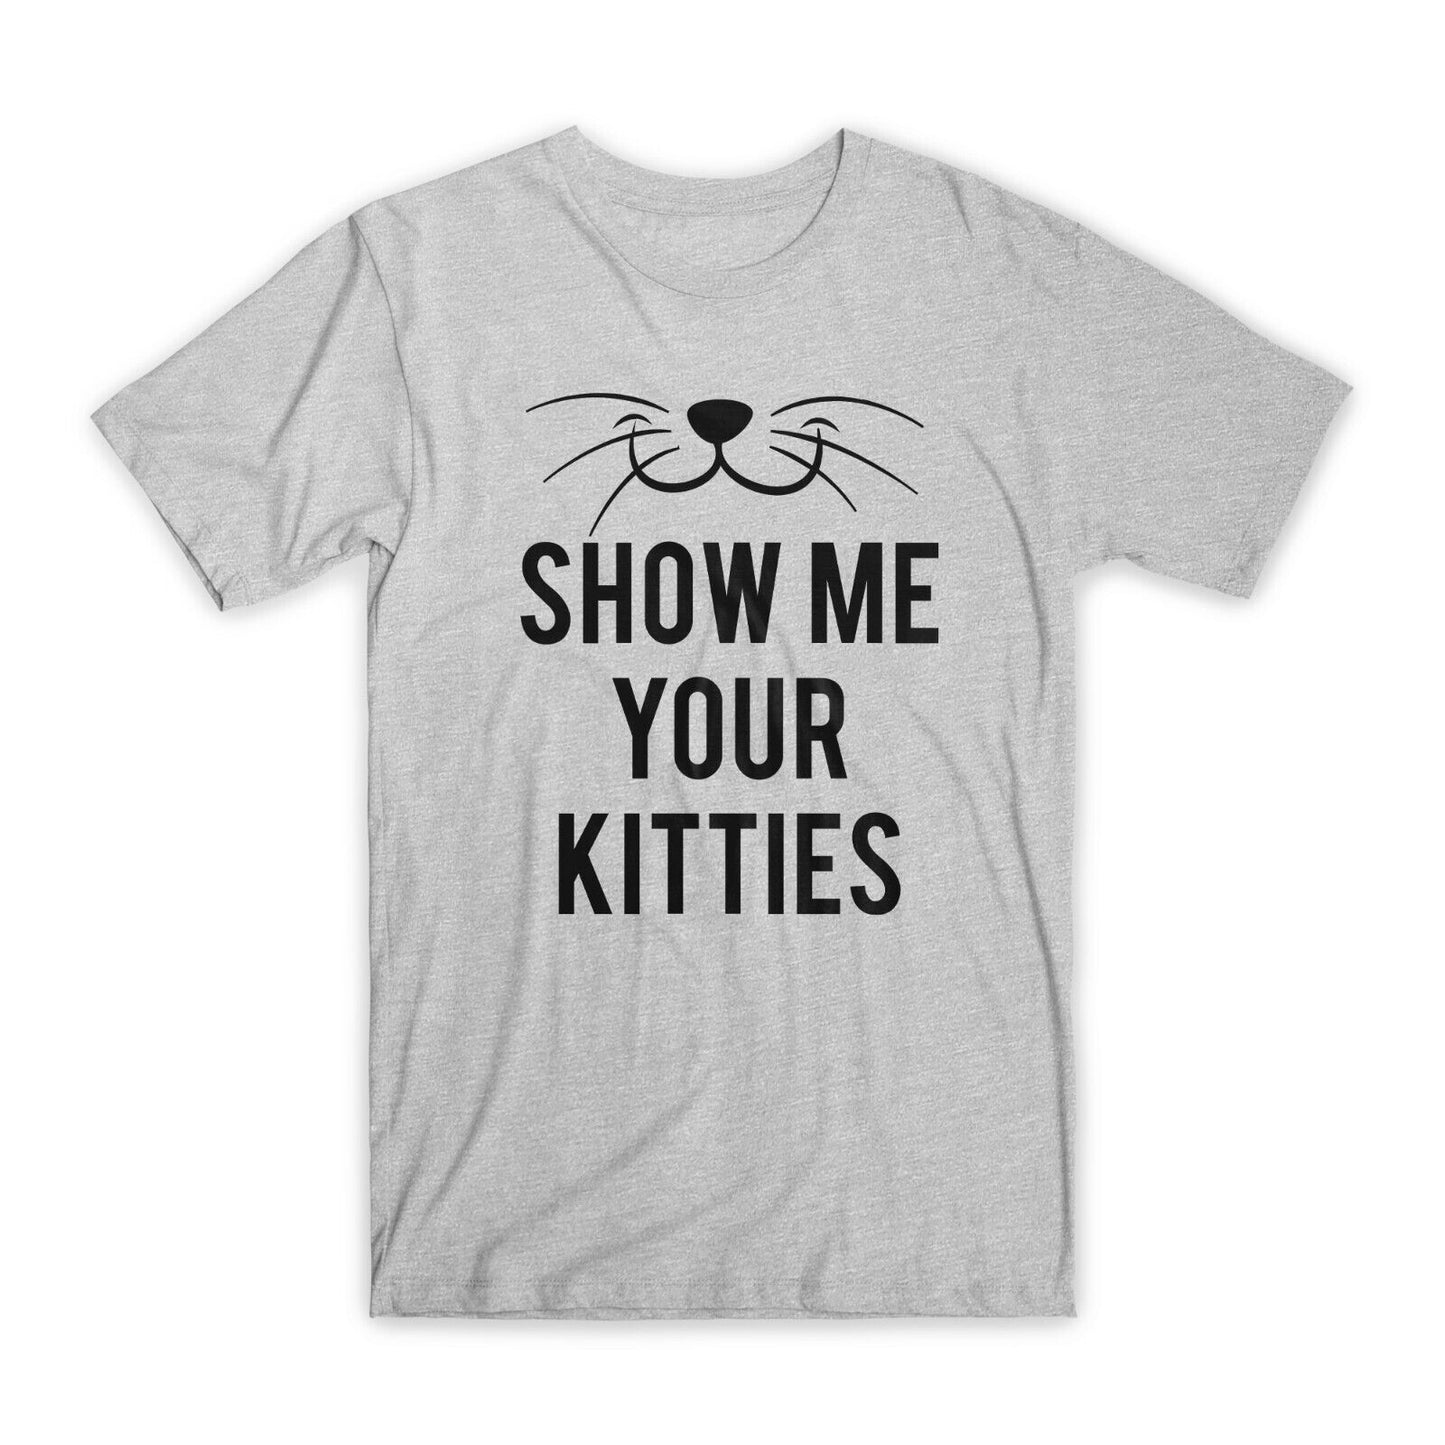 Show Me Your Kitties T-Shirt Premium Soft Cotton Crew Neck Funny Tees Gifts NEW